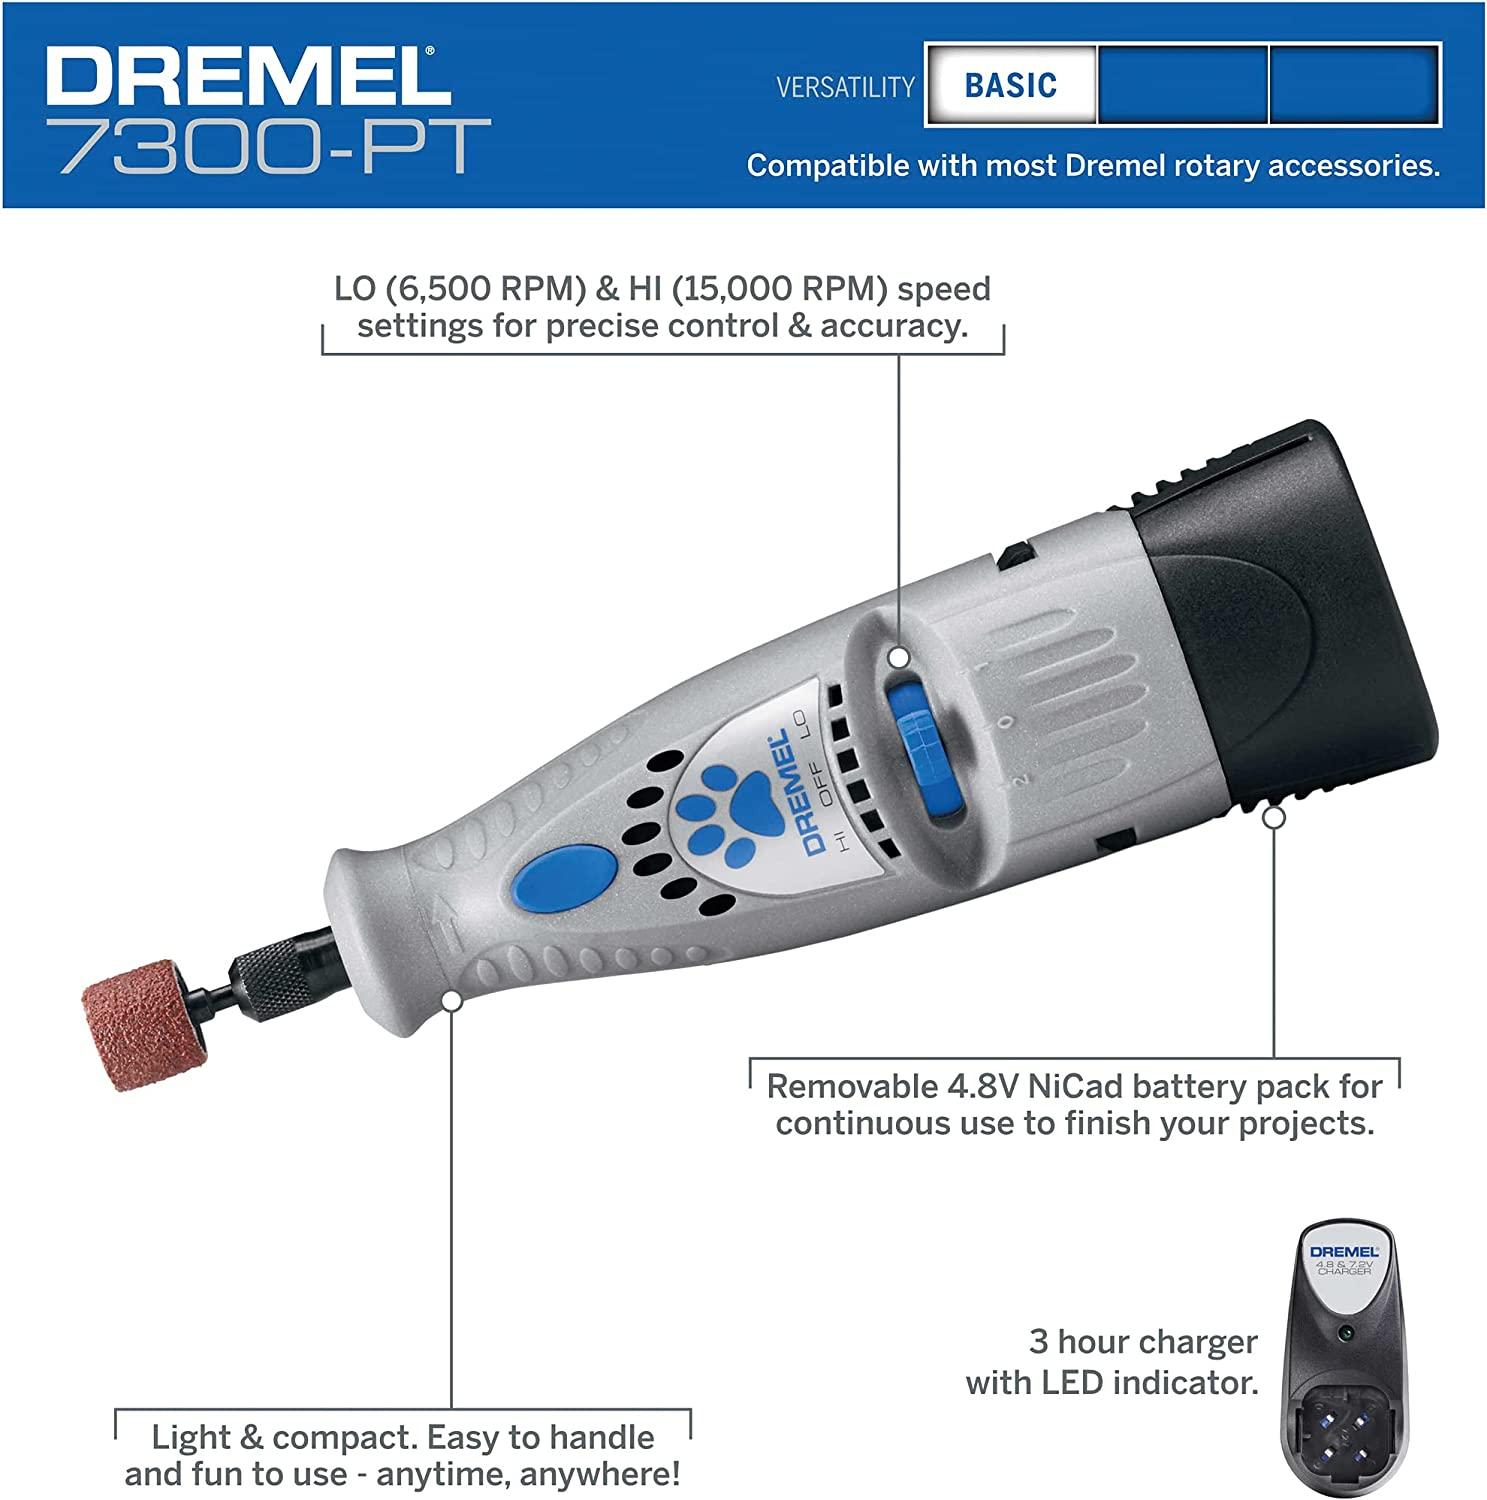 Dremel 7300-PT 4.8V Cordless Pet Dog Nail Grooming & Grinding Tool, Easy to  Use, Rechargeable, Safely Trim Pet & Dog Nails , Grey , Medium Old Model